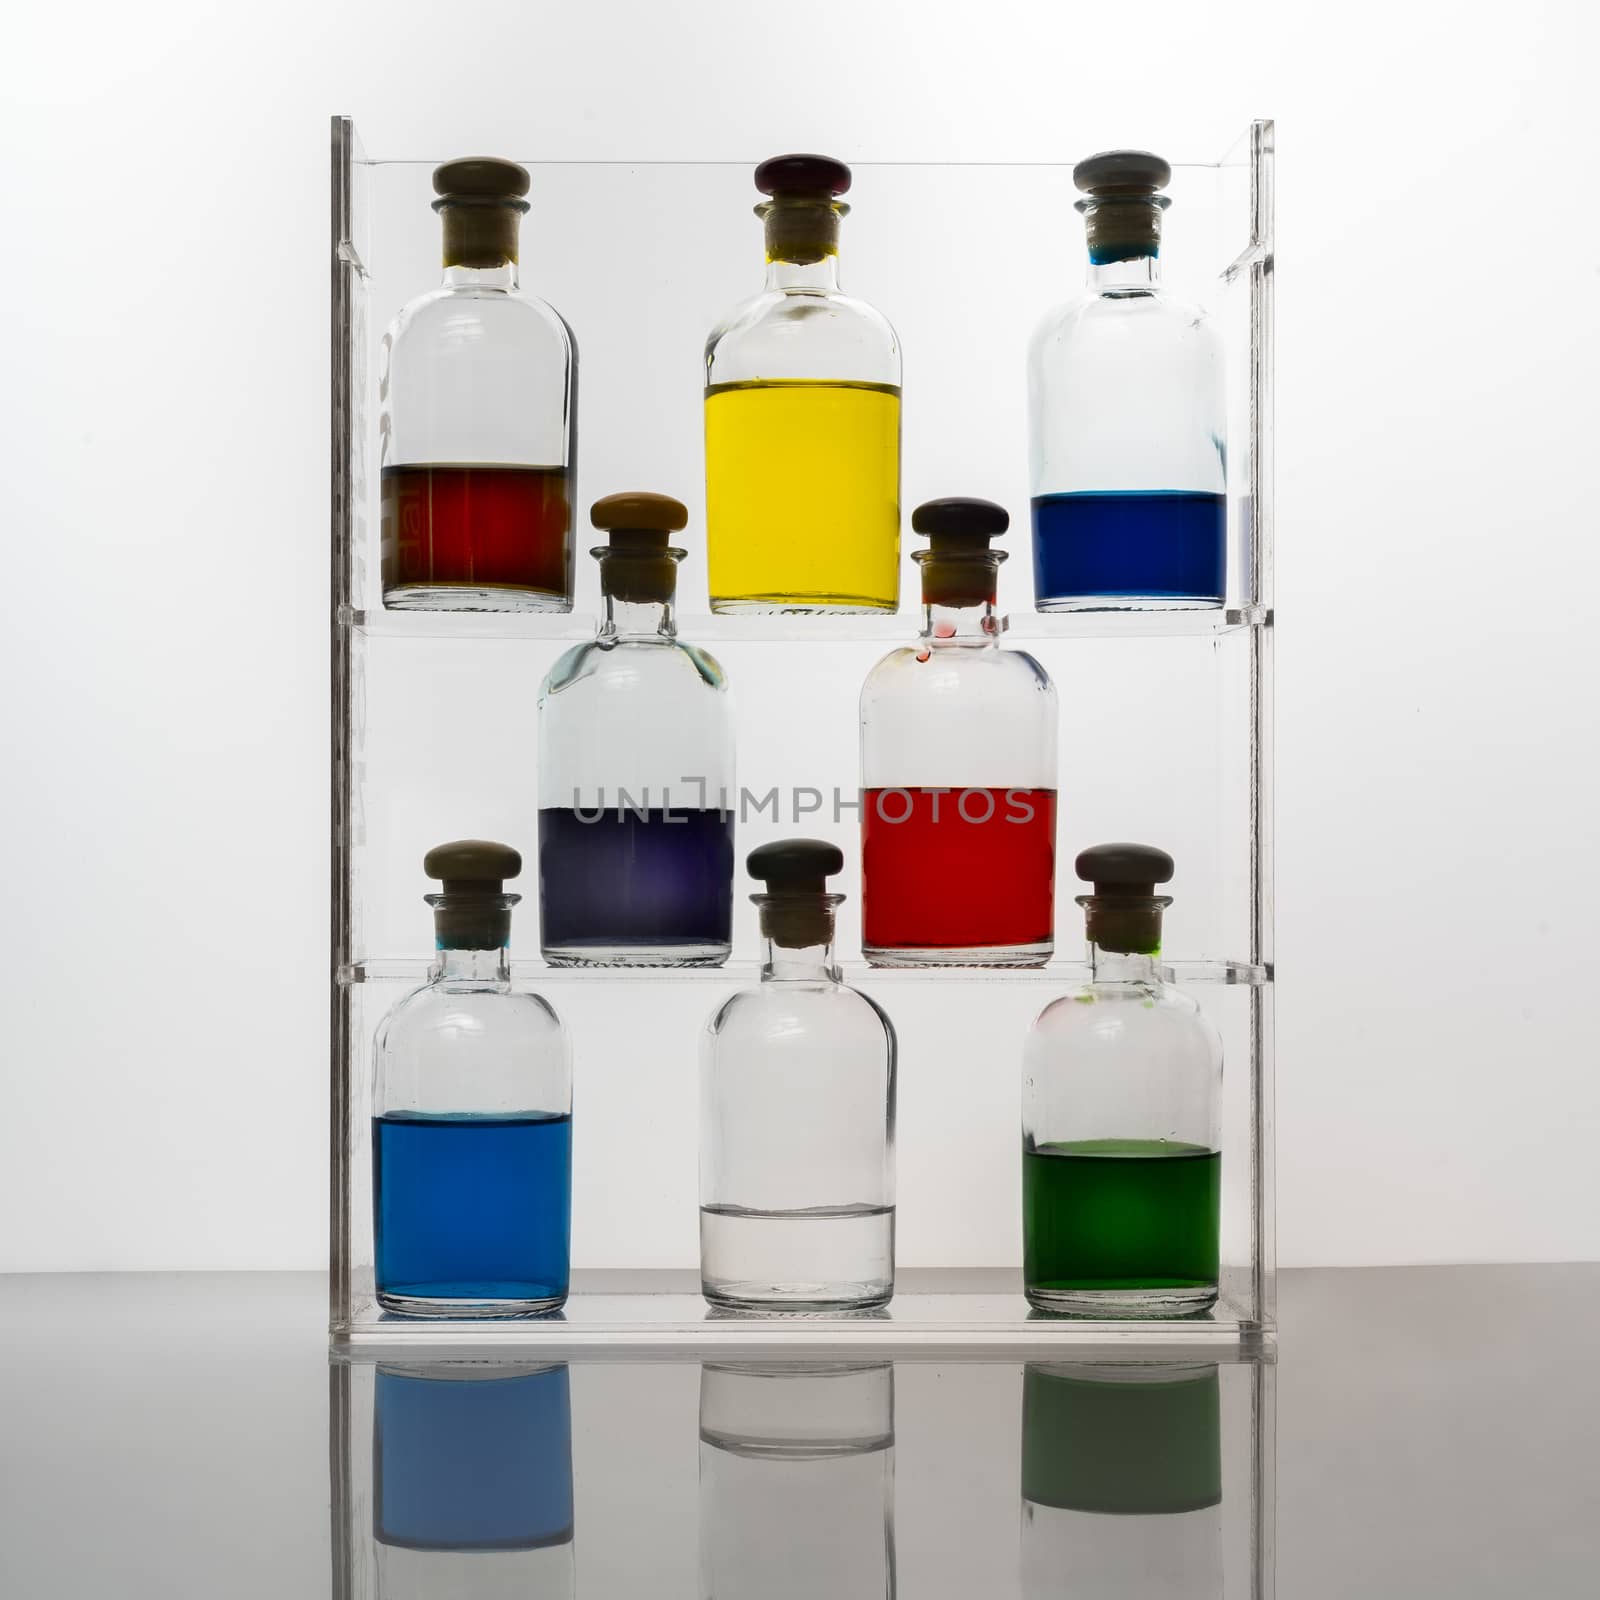 Small glass bottles containing colored liquid